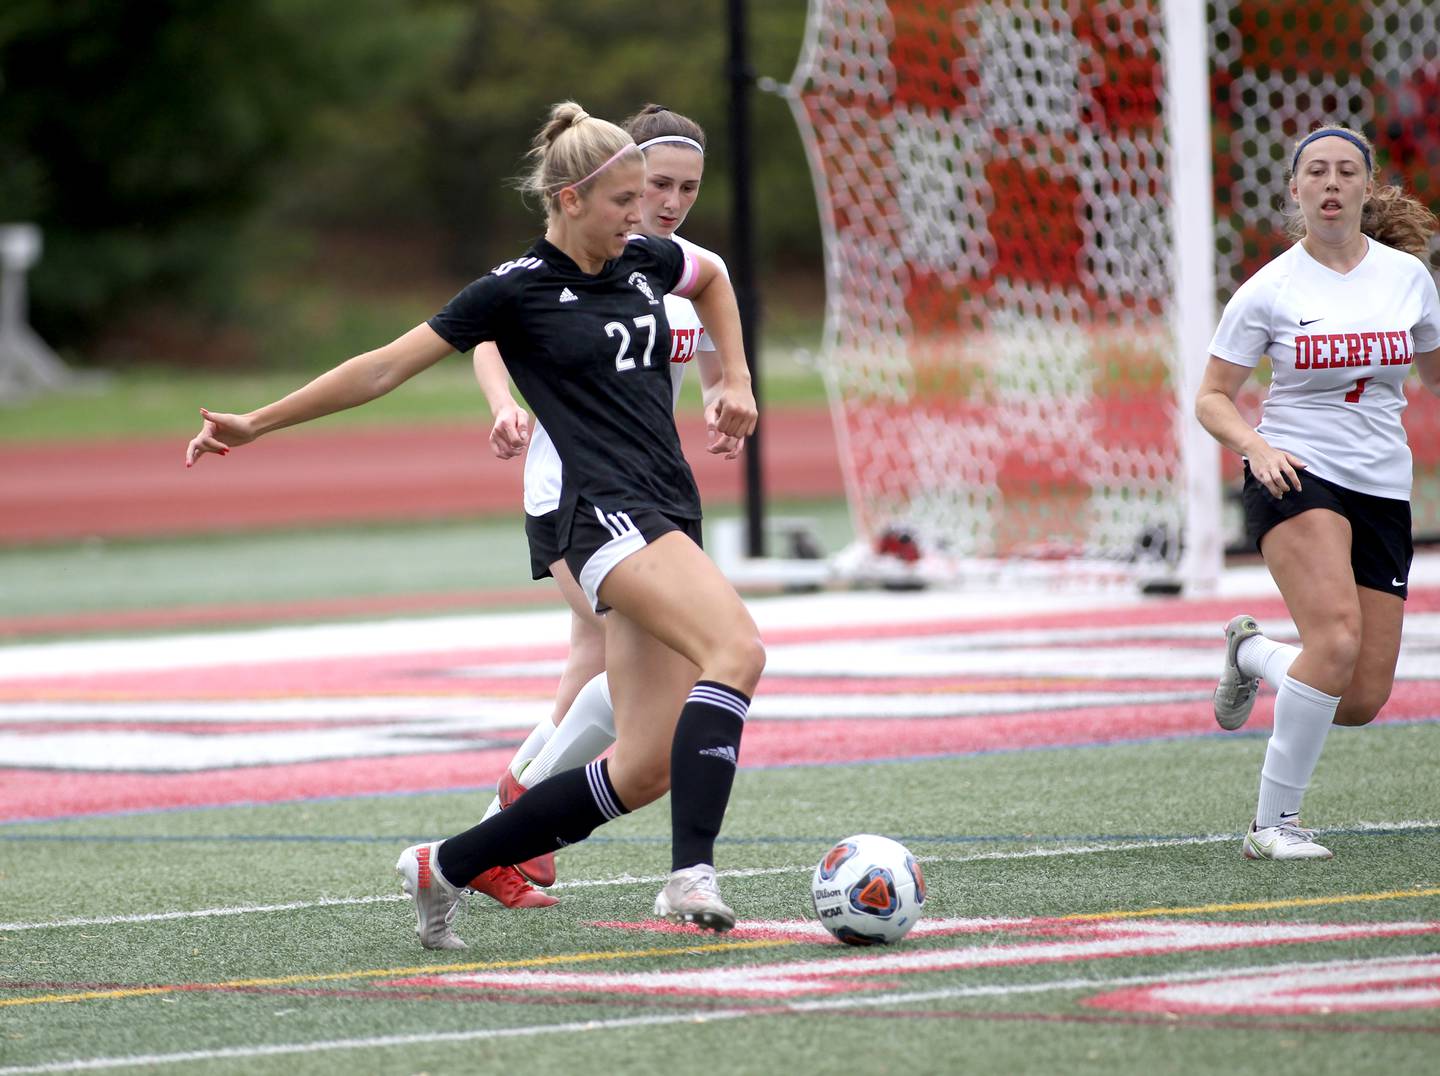 Fenwick’s Kate Henige (27) goes after the ball during their IHSA Class 2A State consolation game against Deerfield at North Central College in Naperville on Saturday, June 4, 2022.